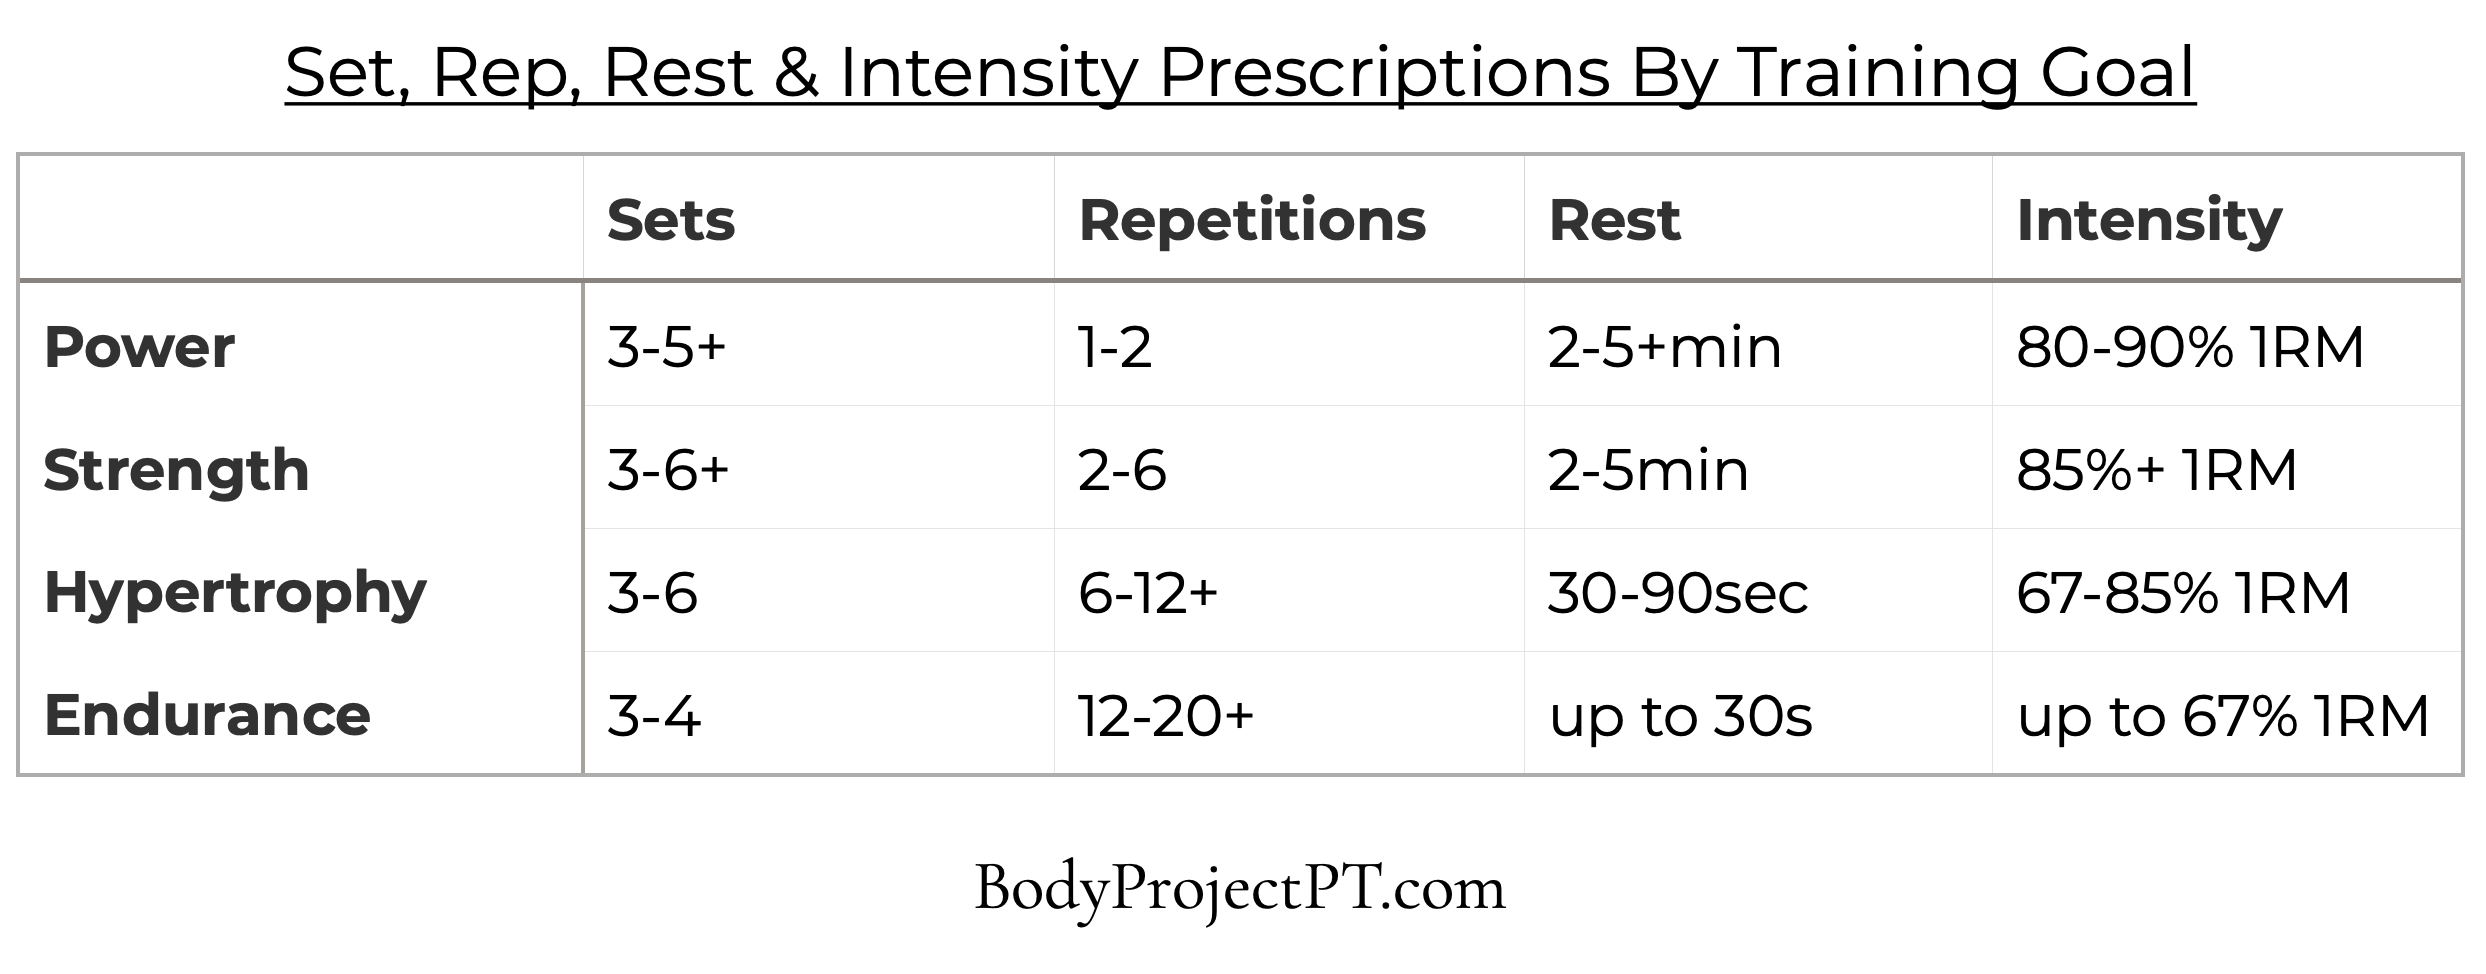 table of sets reps rest intensity by training goal